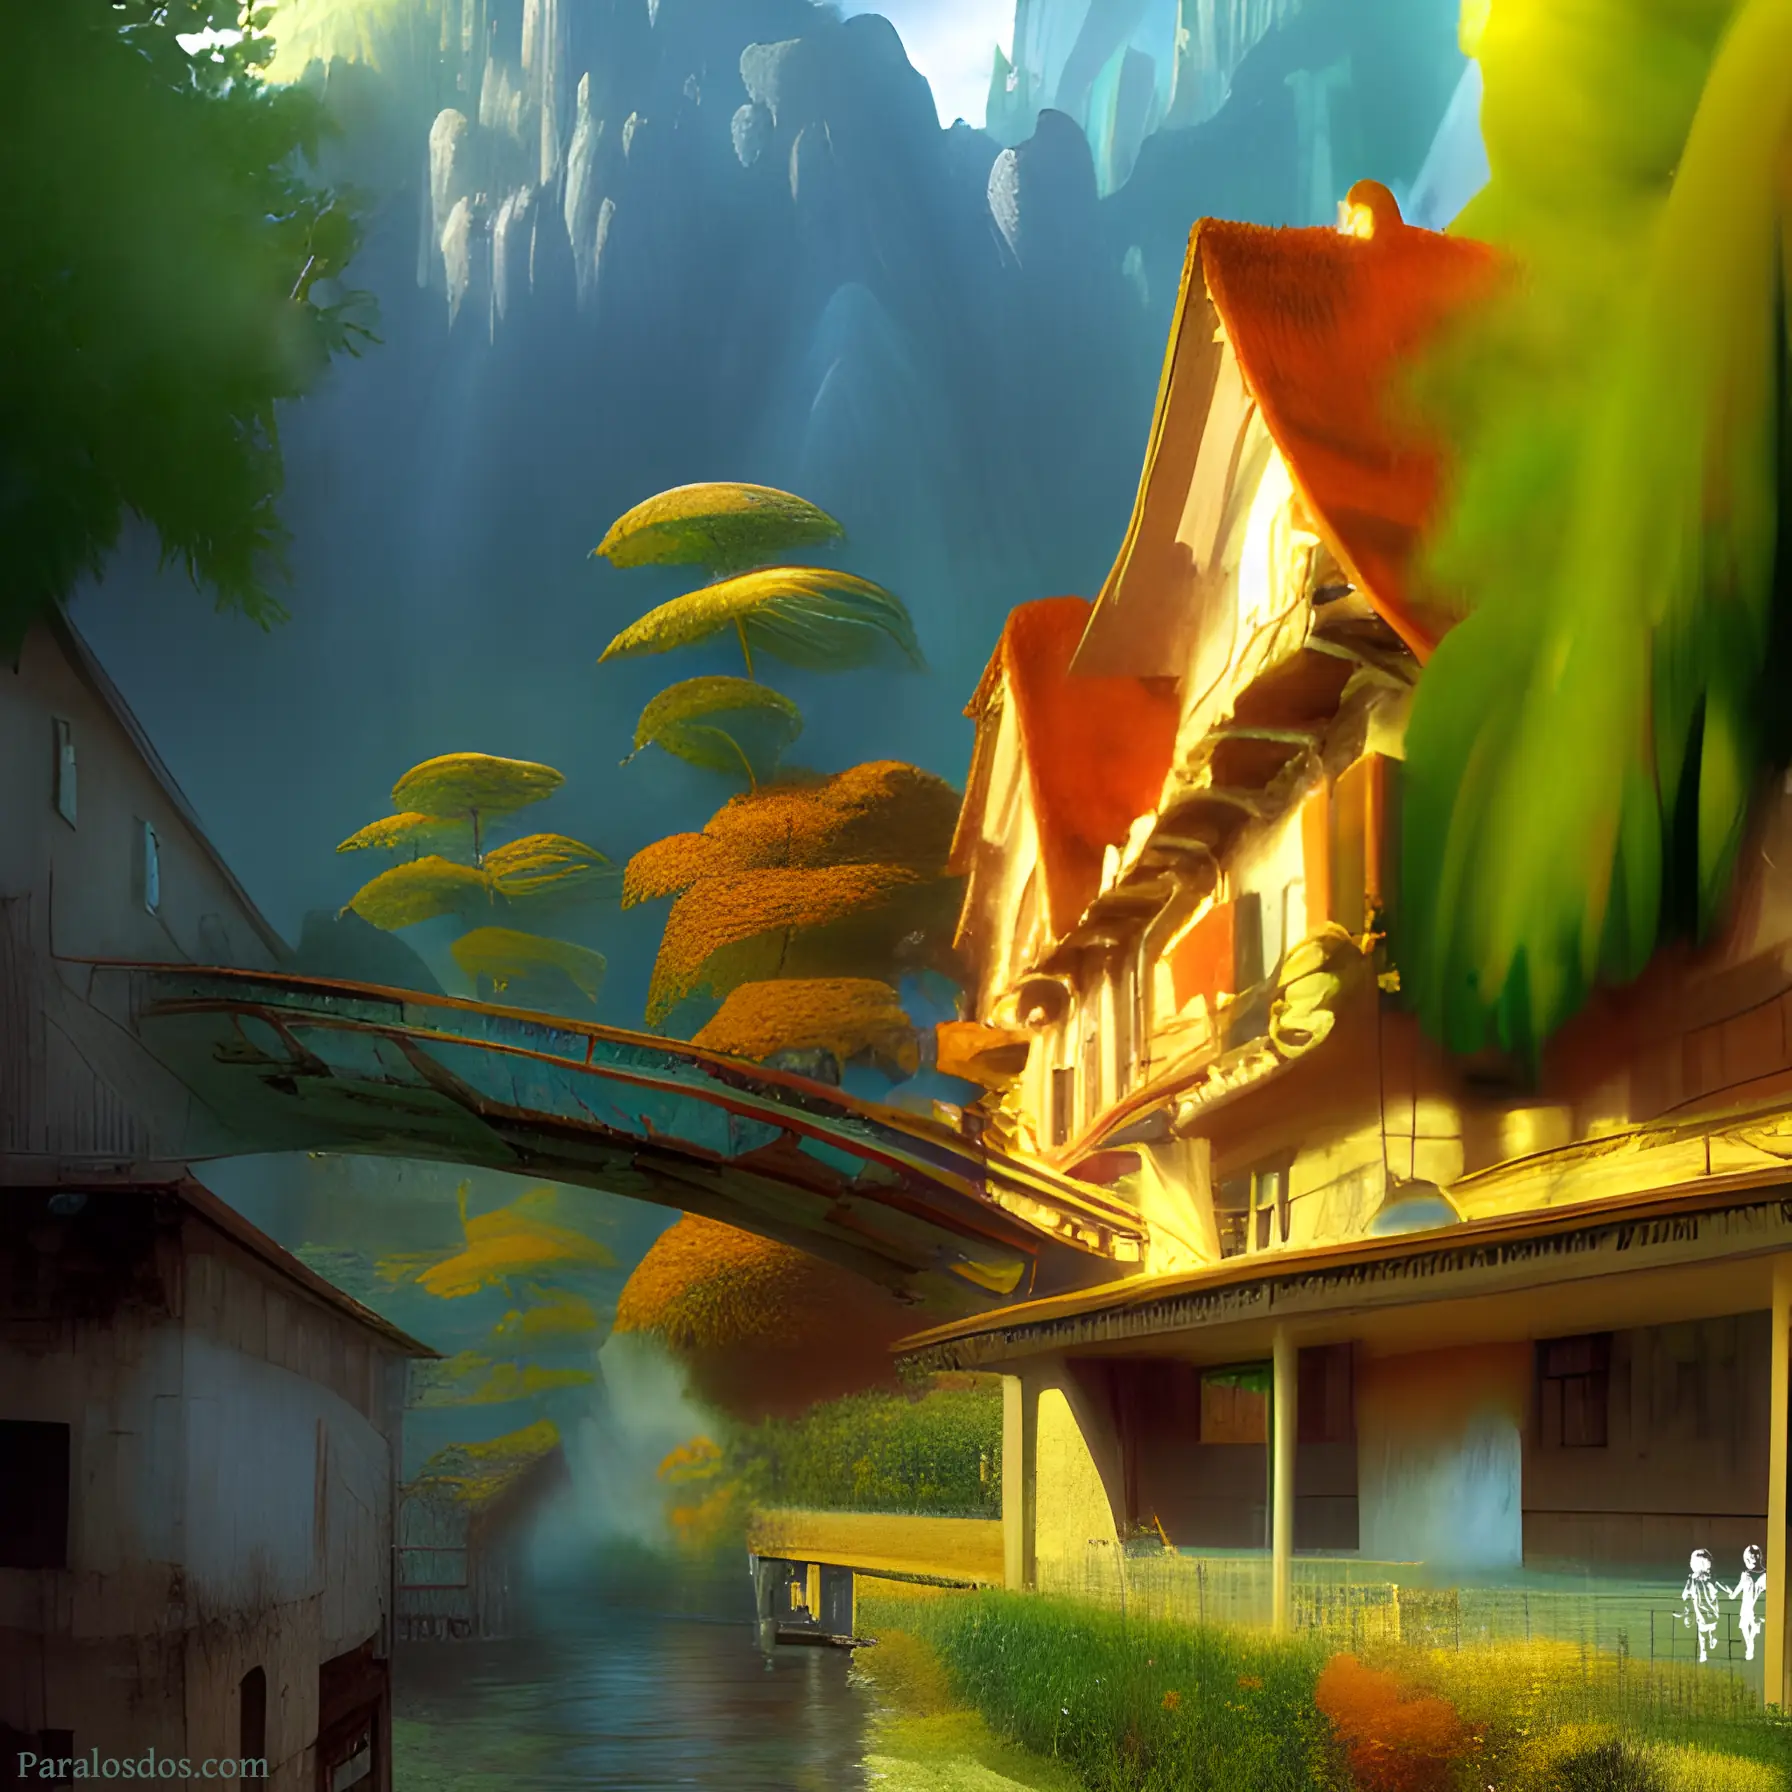 An artistic rendering of a mountain village. There is a bridge over a river leading to the upper floors of a house.